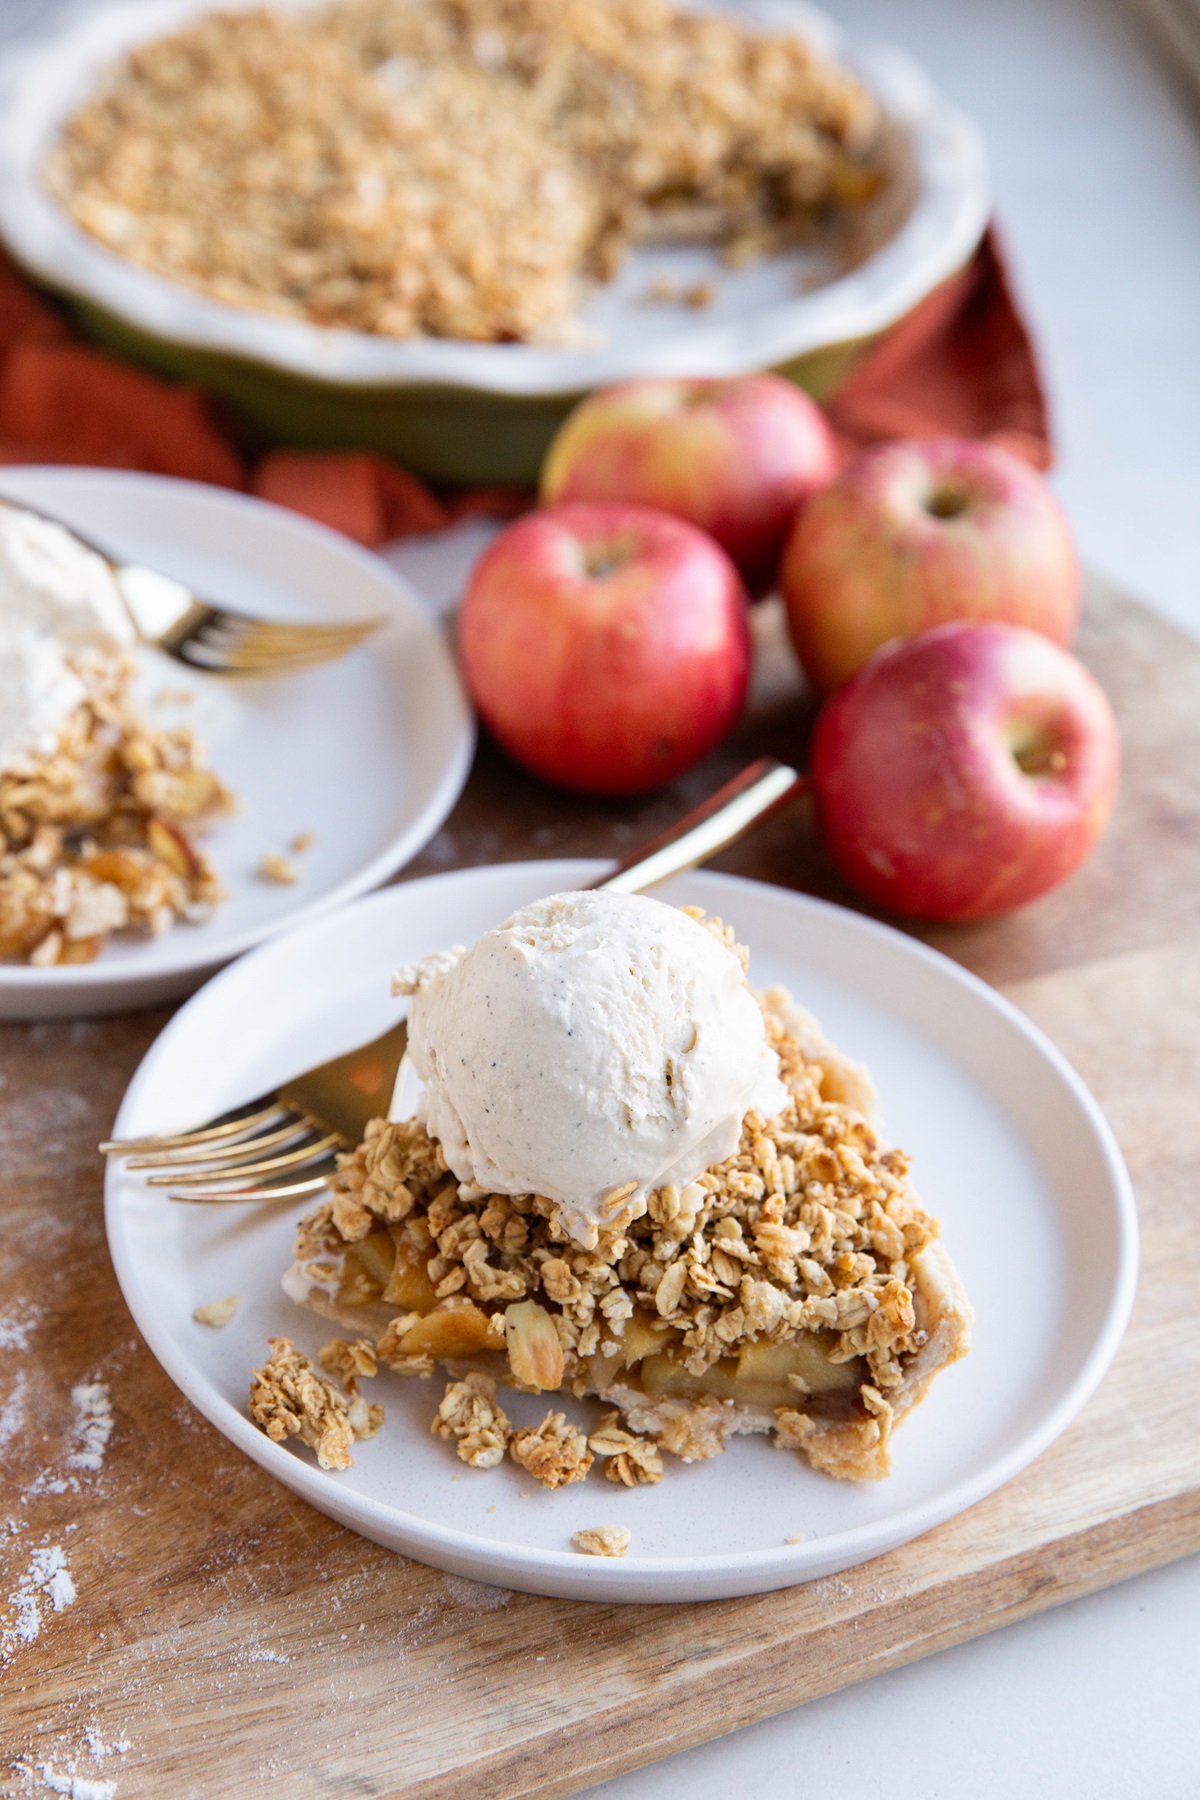 Apple pie with granola topping on two plates.